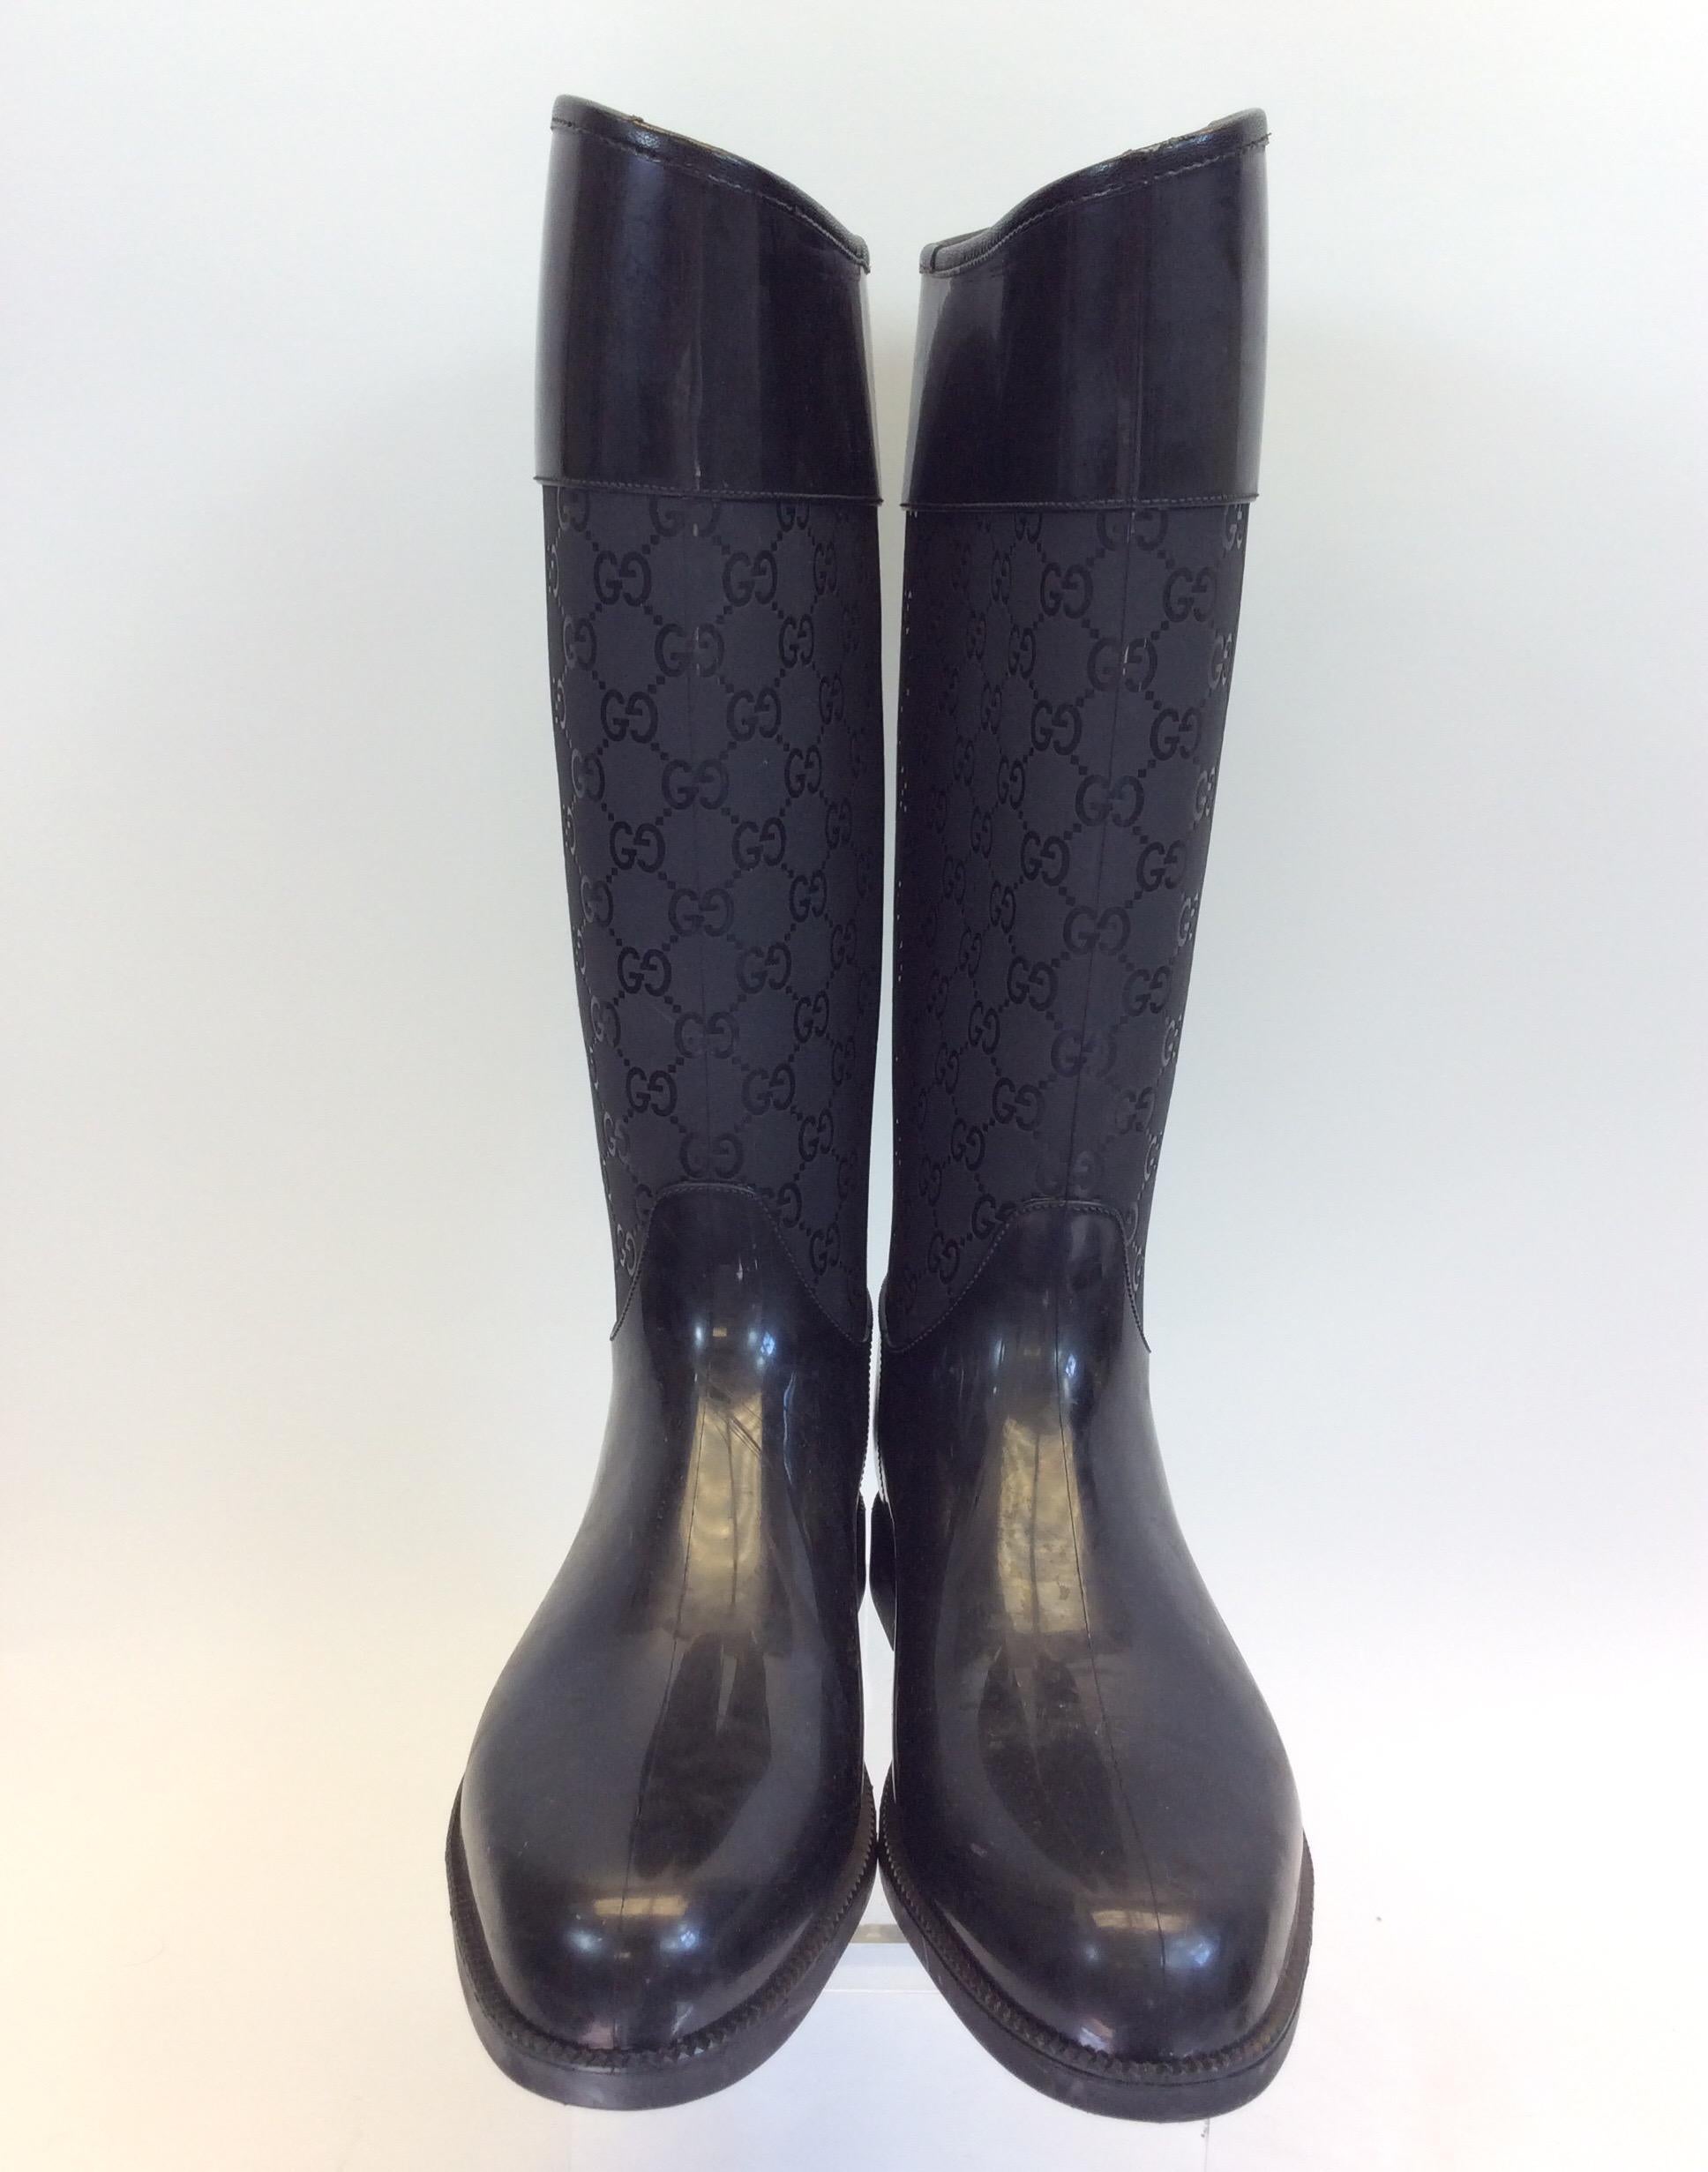 Gucci Black Monogram Rainboot
$299
Made in Italy 
Size 40